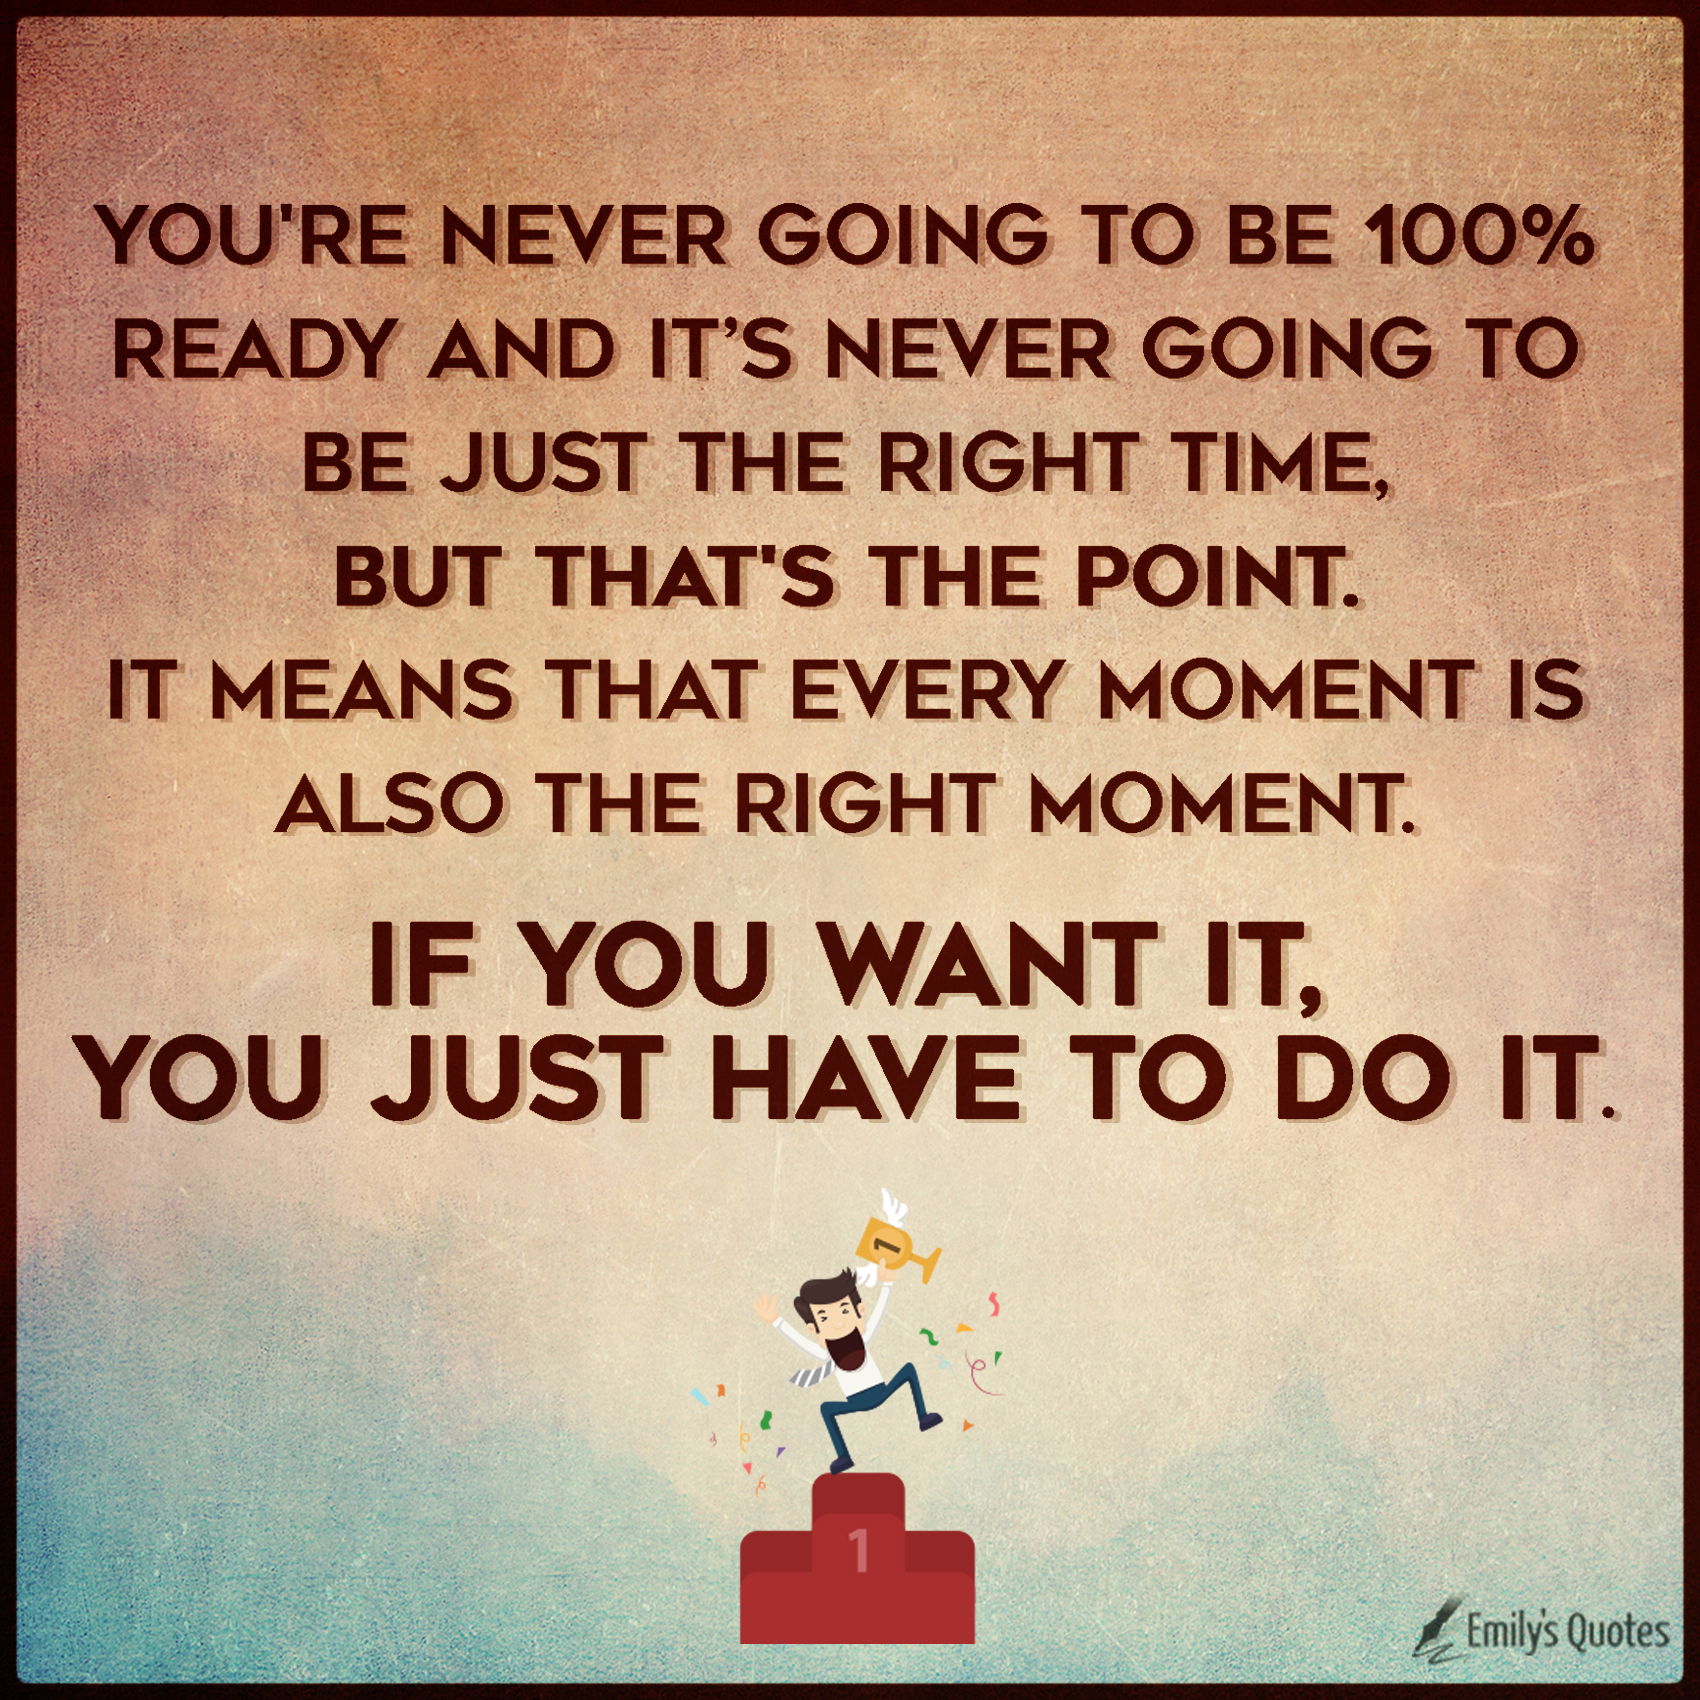 You’re never going to be 100% ready and it’s never going to be just the right time, but